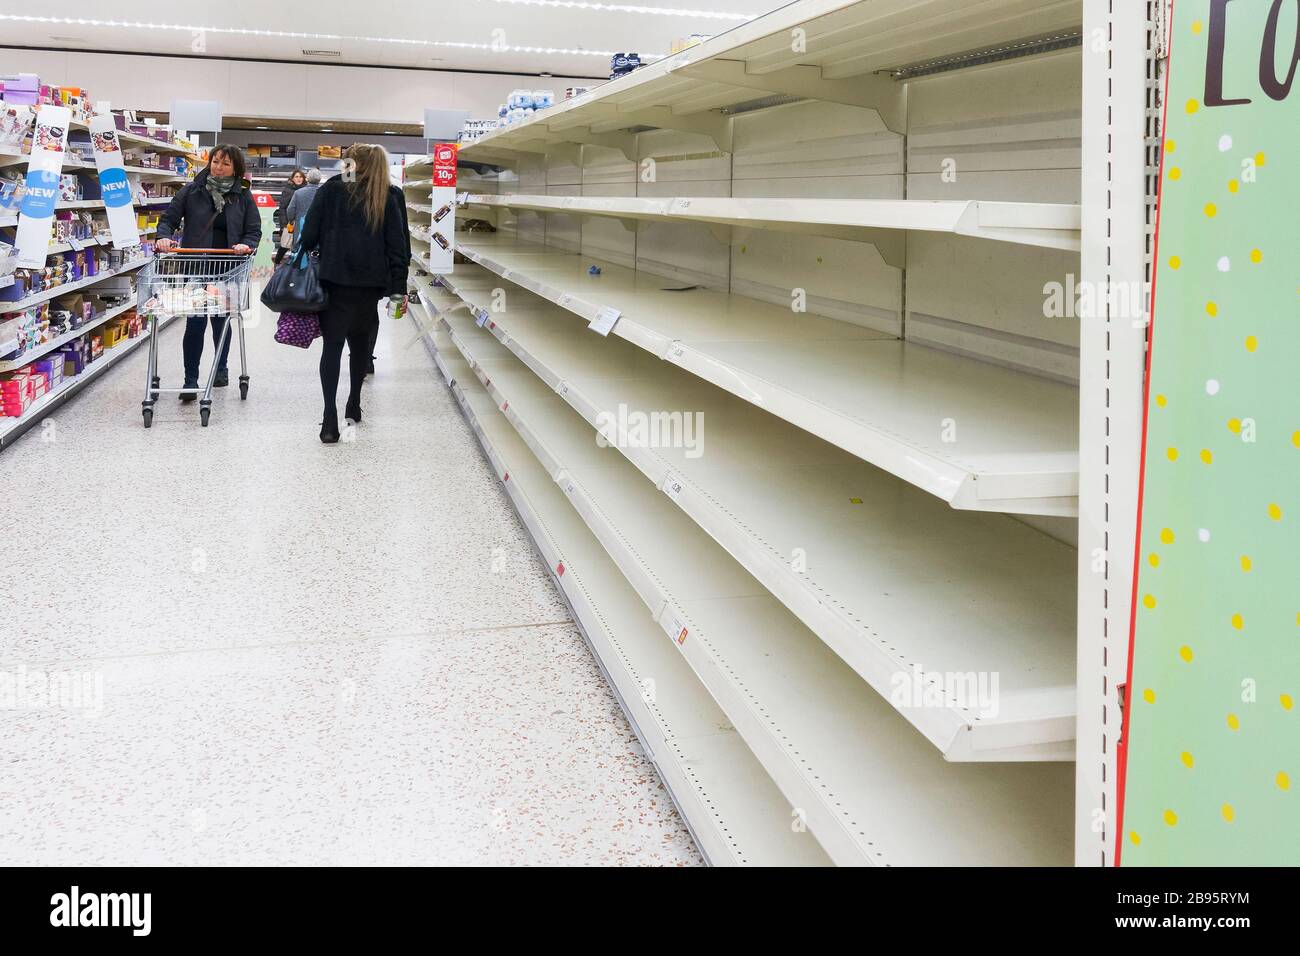 Panic buying leads to shortages in UK supermarkets in March 2020 due to covid-19 fears. Stock Photo